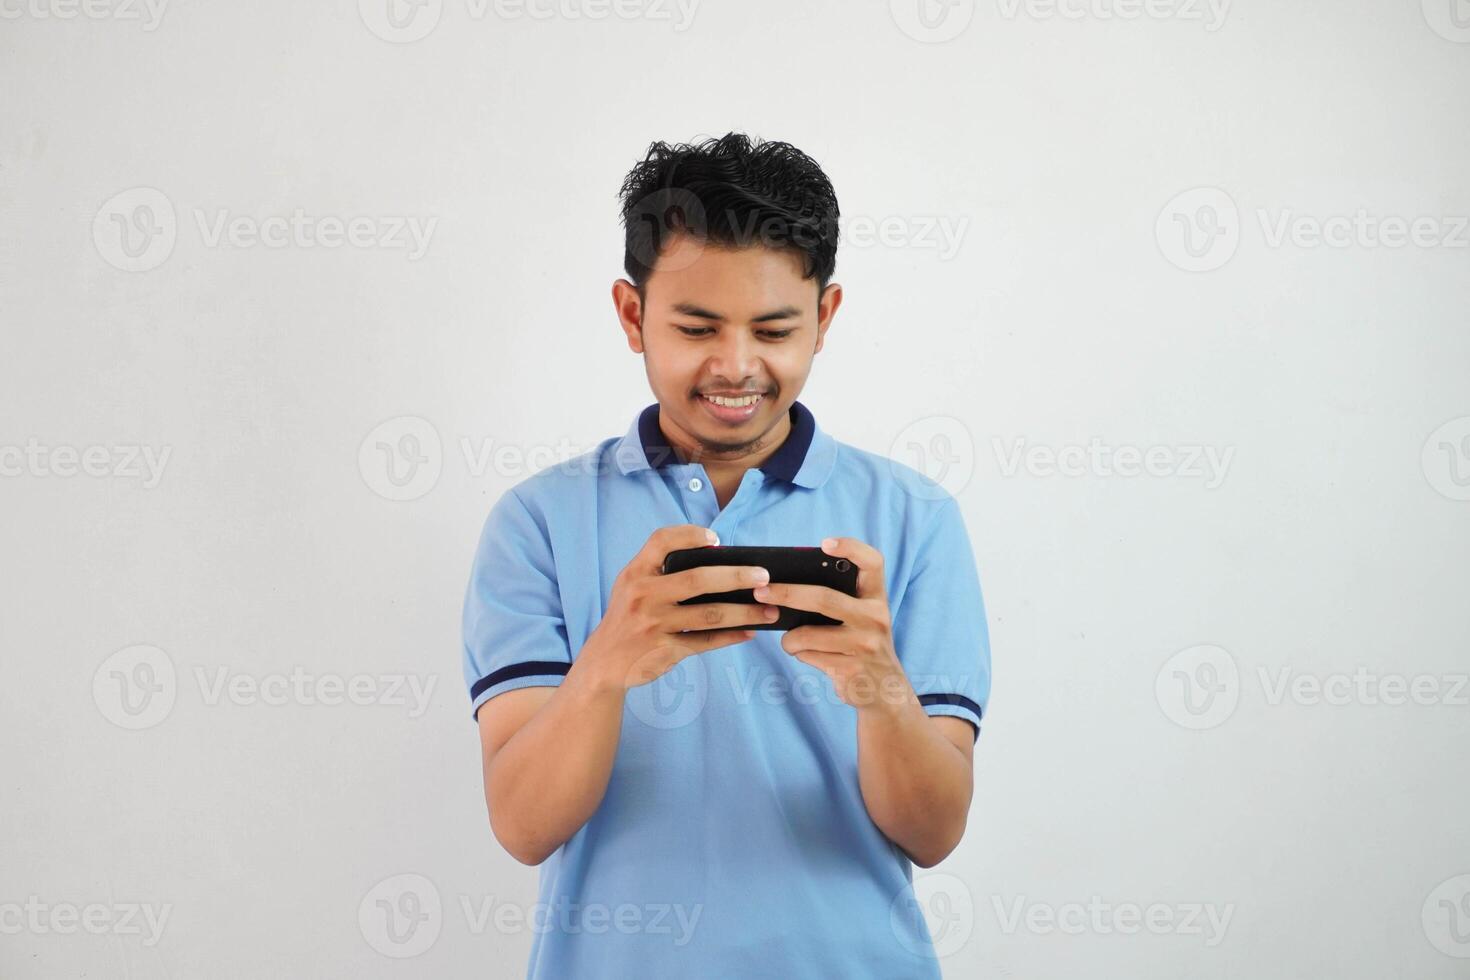 smiling or happy portrait young asian man playing game with smartphone isolated on white background photo